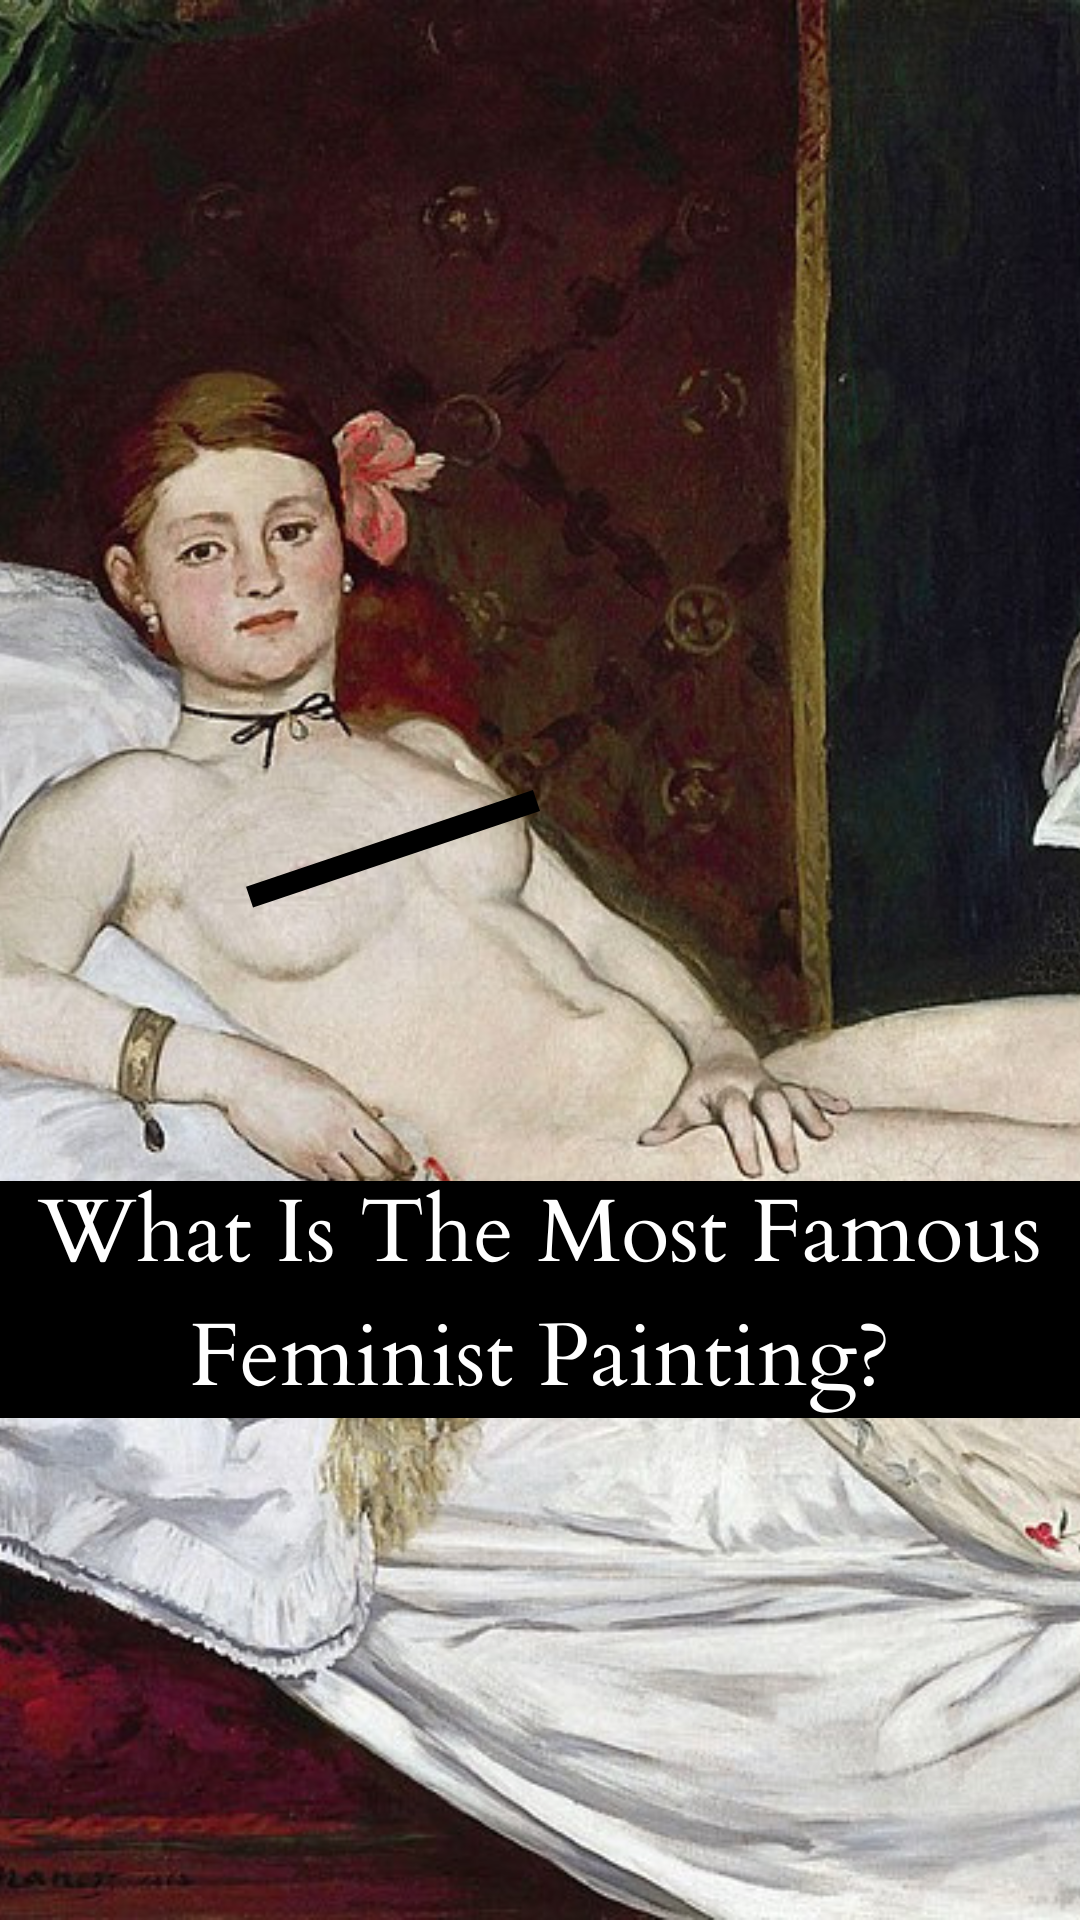 What Is The Most Famous Feminist Painting?